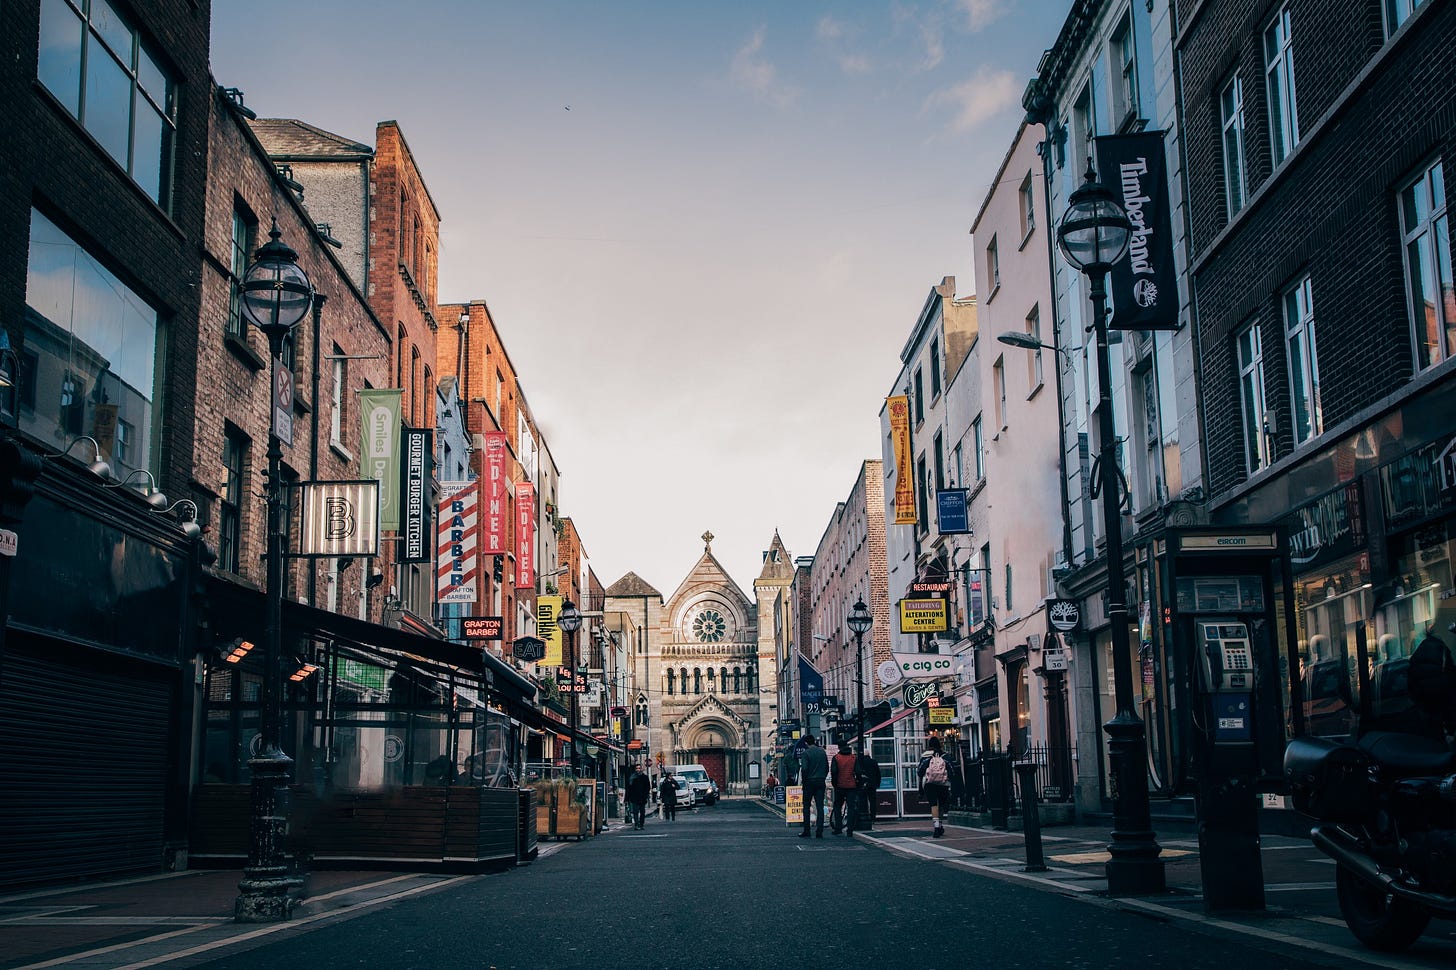 Photo of Parliament Street in Dublin for article by Larry G. Maguire